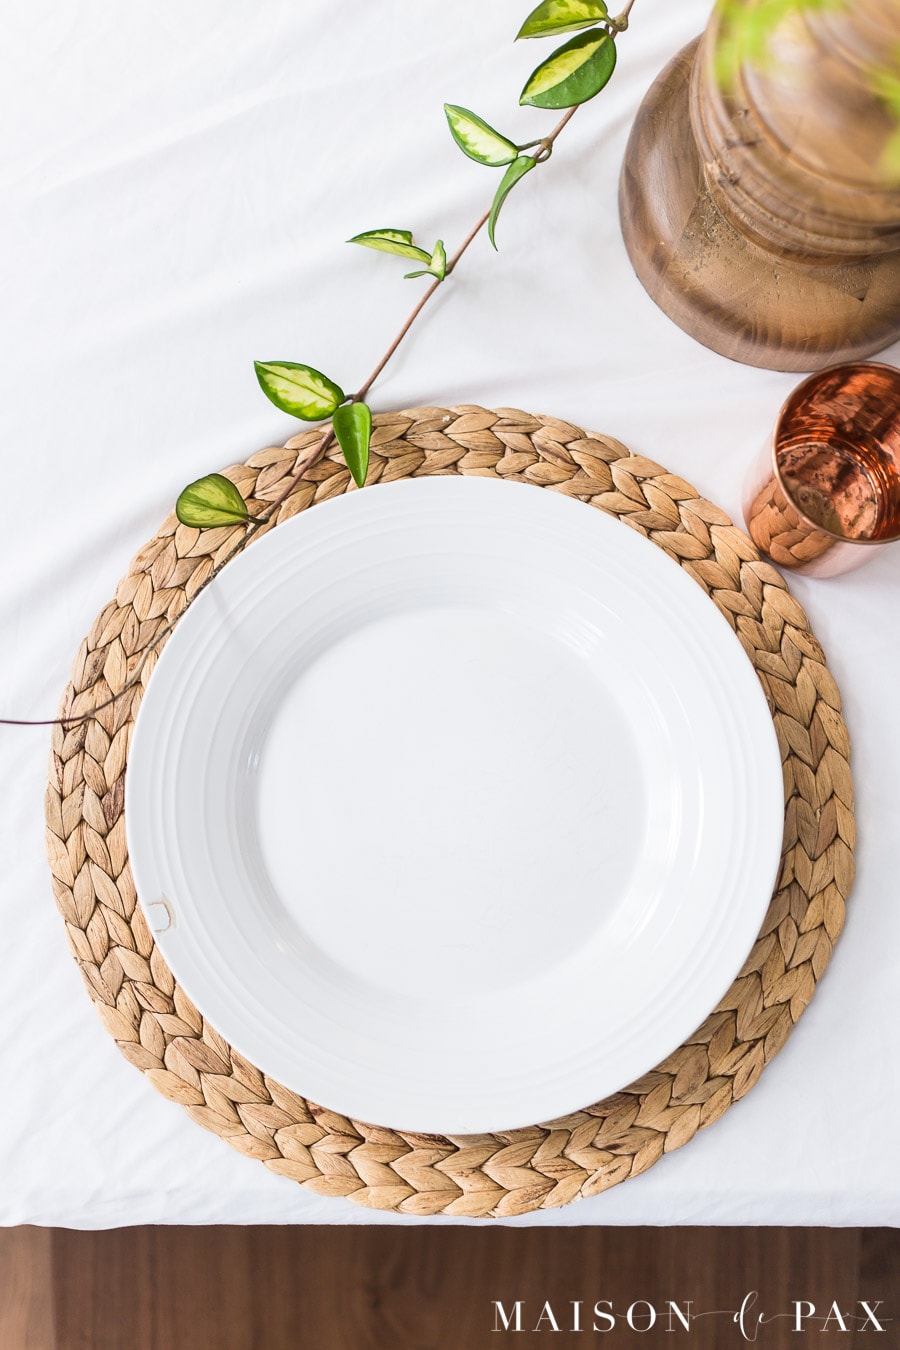 simple white dishes and woven placemat | Maison de Pax